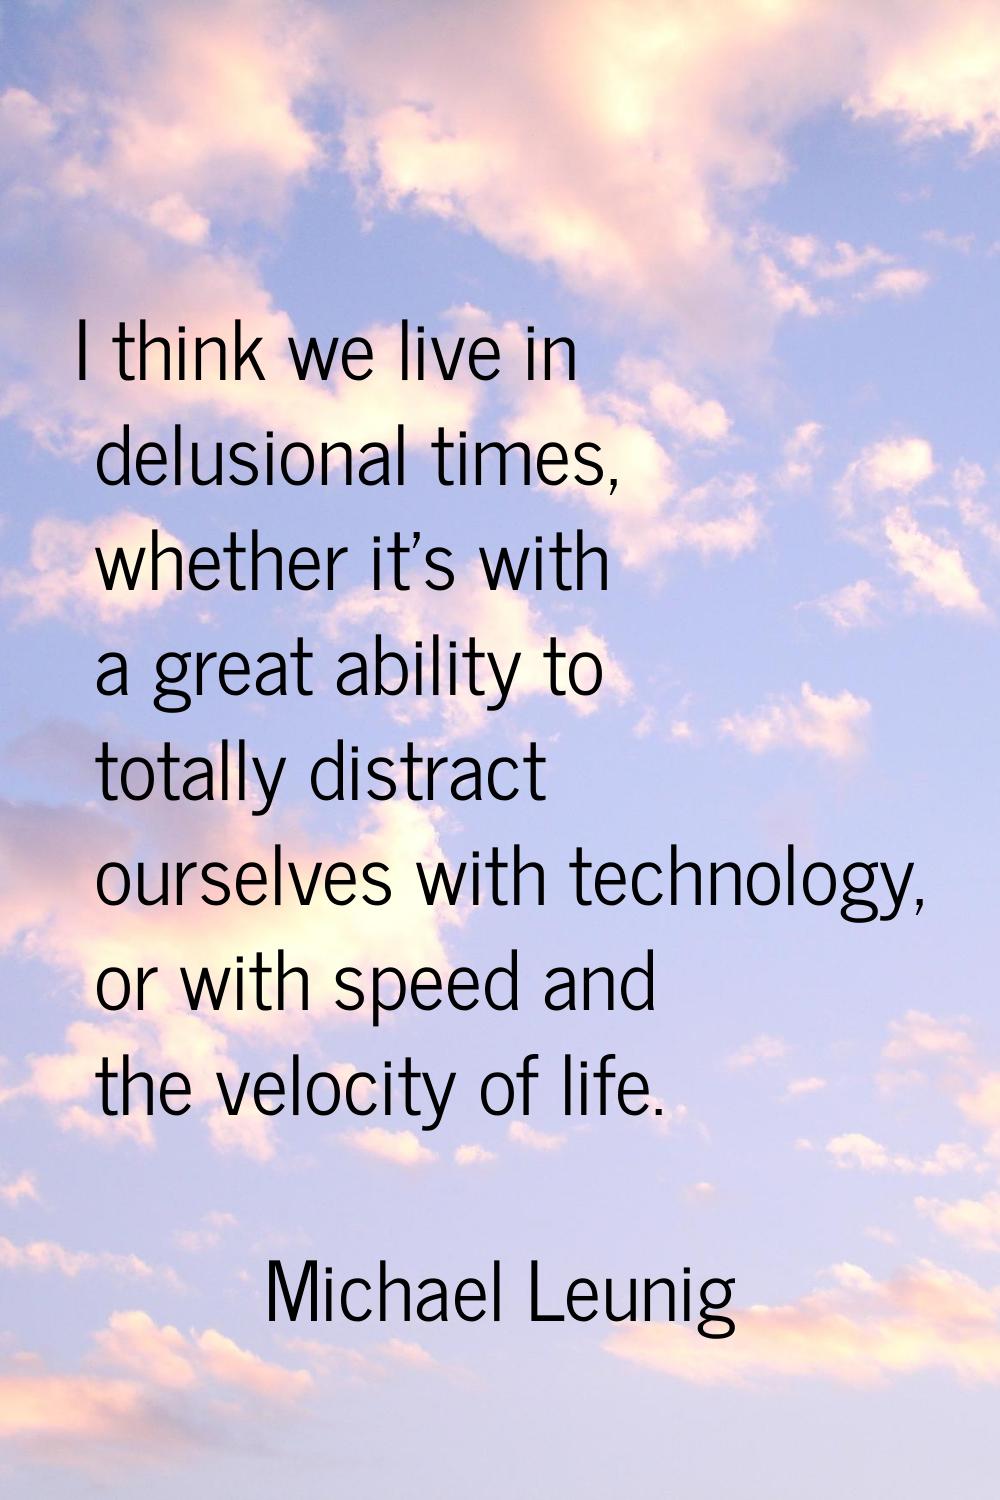 I think we live in delusional times, whether it's with a great ability to totally distract ourselve